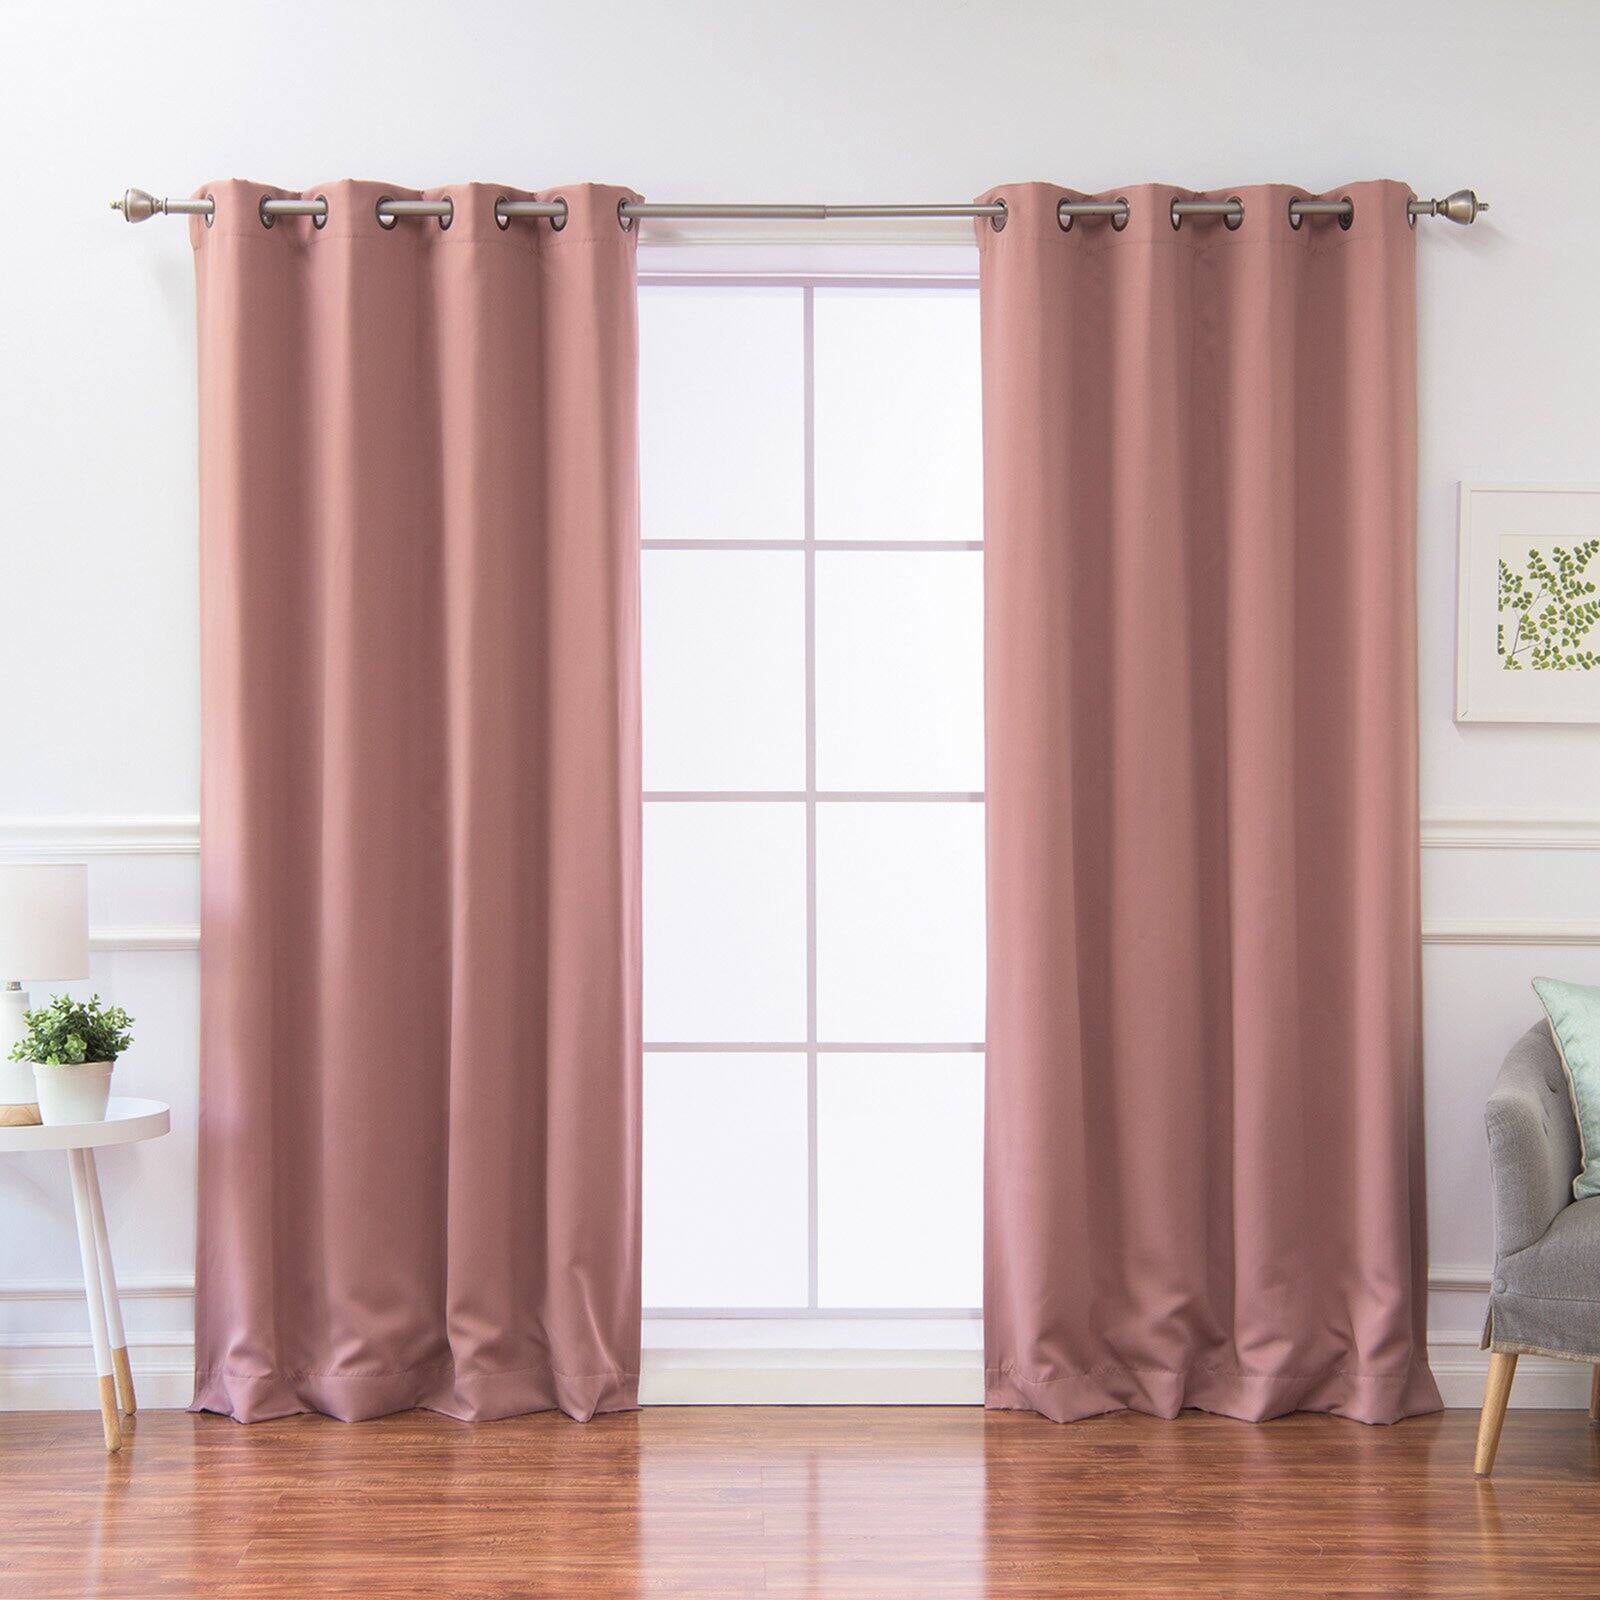 Grommet Thermal Insulated Summer Heat/Win Texlab Blackout Curtains for Bedroom